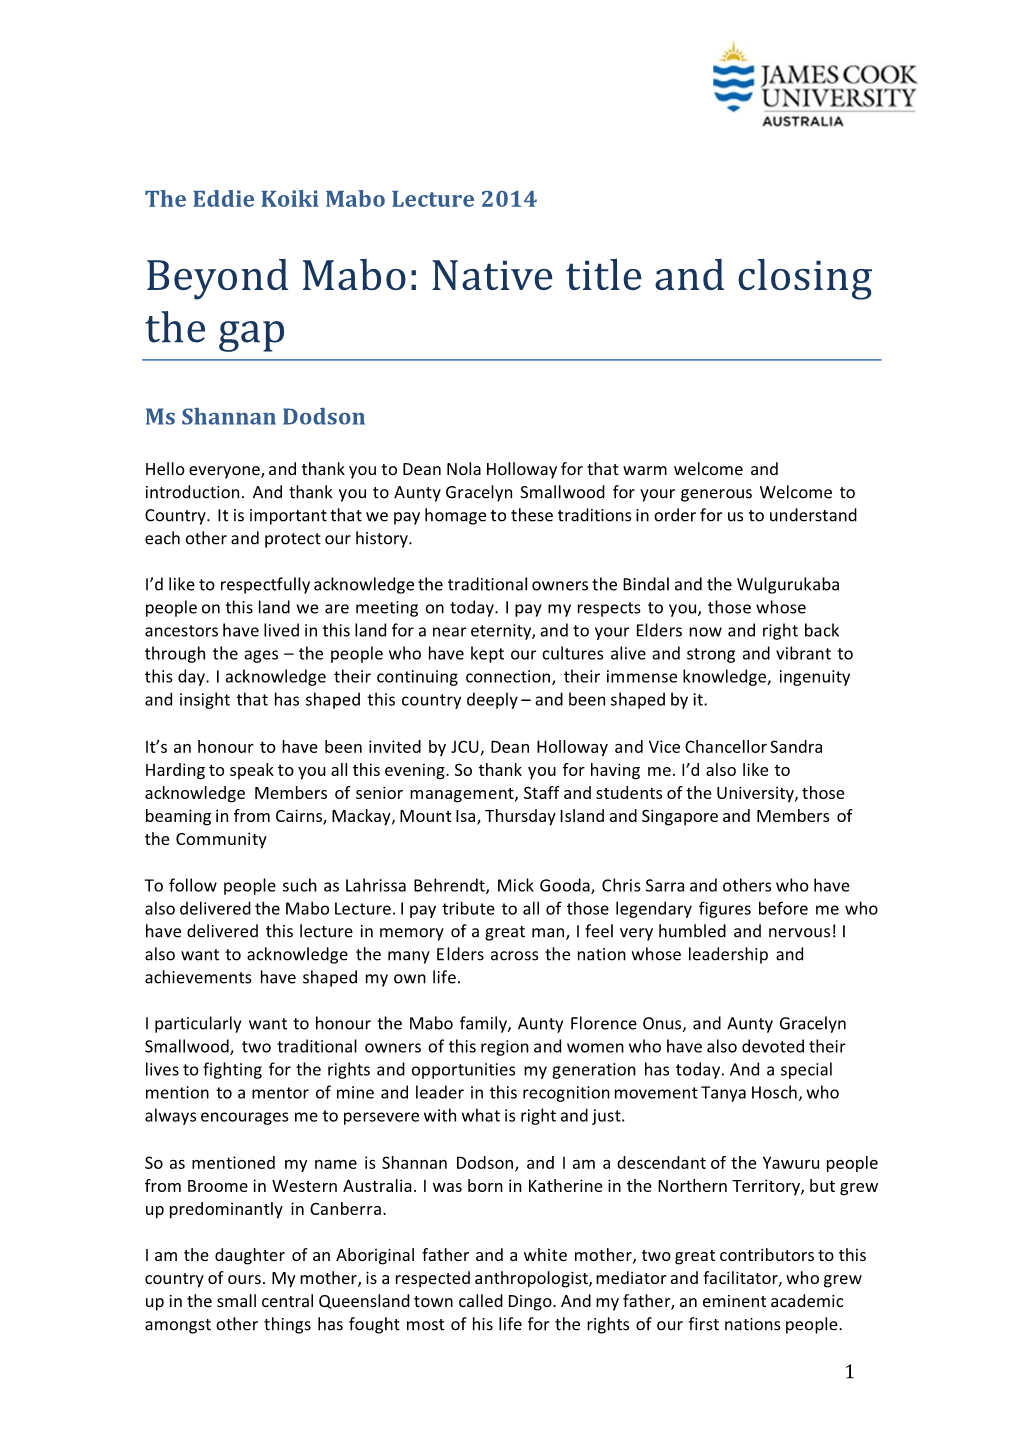 Beyond Mabo: Native Title and Closing the Gap